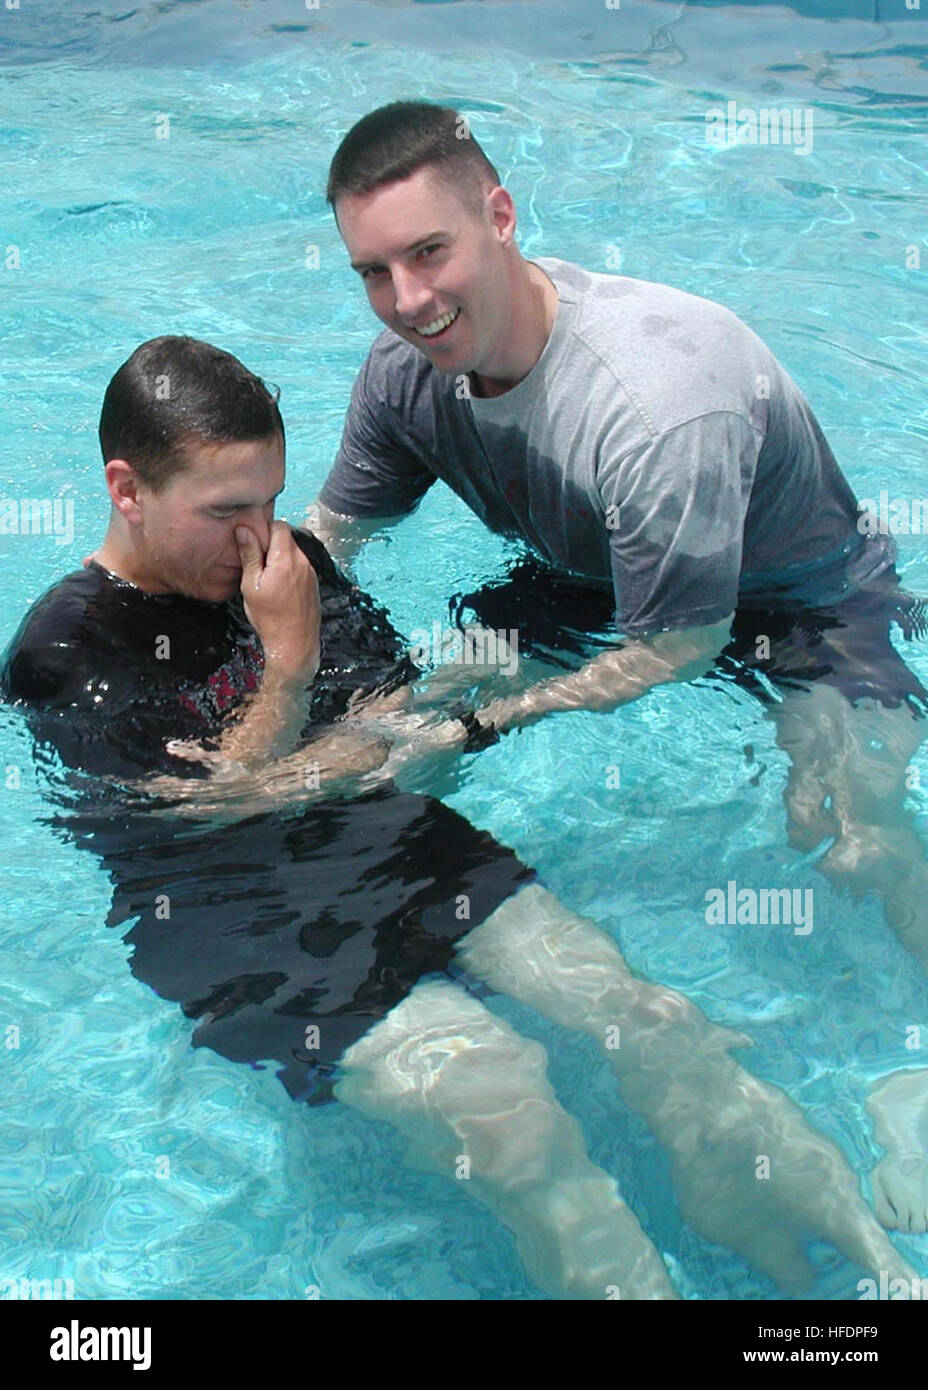 030503-N-6197C-002 Aboard USS Boxer (LHD 4) in port Jebel Ali (May 3, 2003) -- Chaplain Bellar, ShipÕs Chaplain, performs a Christian baptism on Storekeeper Ryan P. Schoch in a pool.  The Boxer is in port Jebel Ali, a city in Dubai, UAE.  Boxer is deployed to the Arabian Gulf in support of Operation Iraqi Freedom the multi-national coalition effort to liberate the Iraq's weapons of mass destruction, and end the regime of Saddam Hussein.  U.S. Navy photo by LithographerÕs Mate 3rd Class Sadie Conklin.  (RELEASED) Baptism in a pool Stock Photo